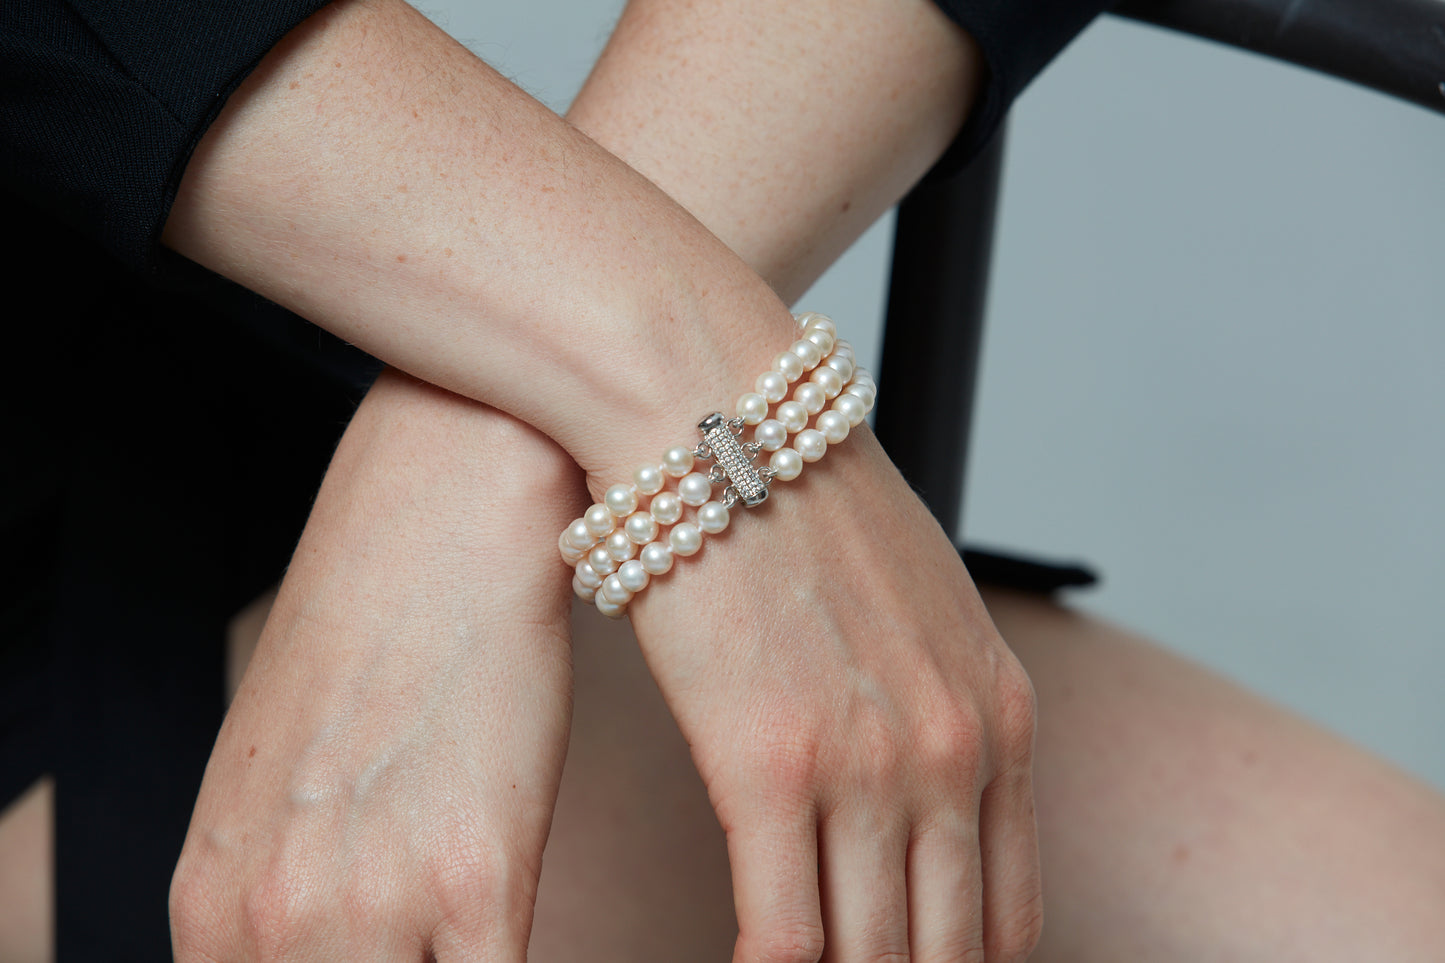 Jewellery - Bracelets - Link Bracelets - Imperial Pearls Sterling Silver  7-8mm White Cultured Freshwater Pearl & Paperclip Two Row Bracelet - Online  Shopping for Canadians